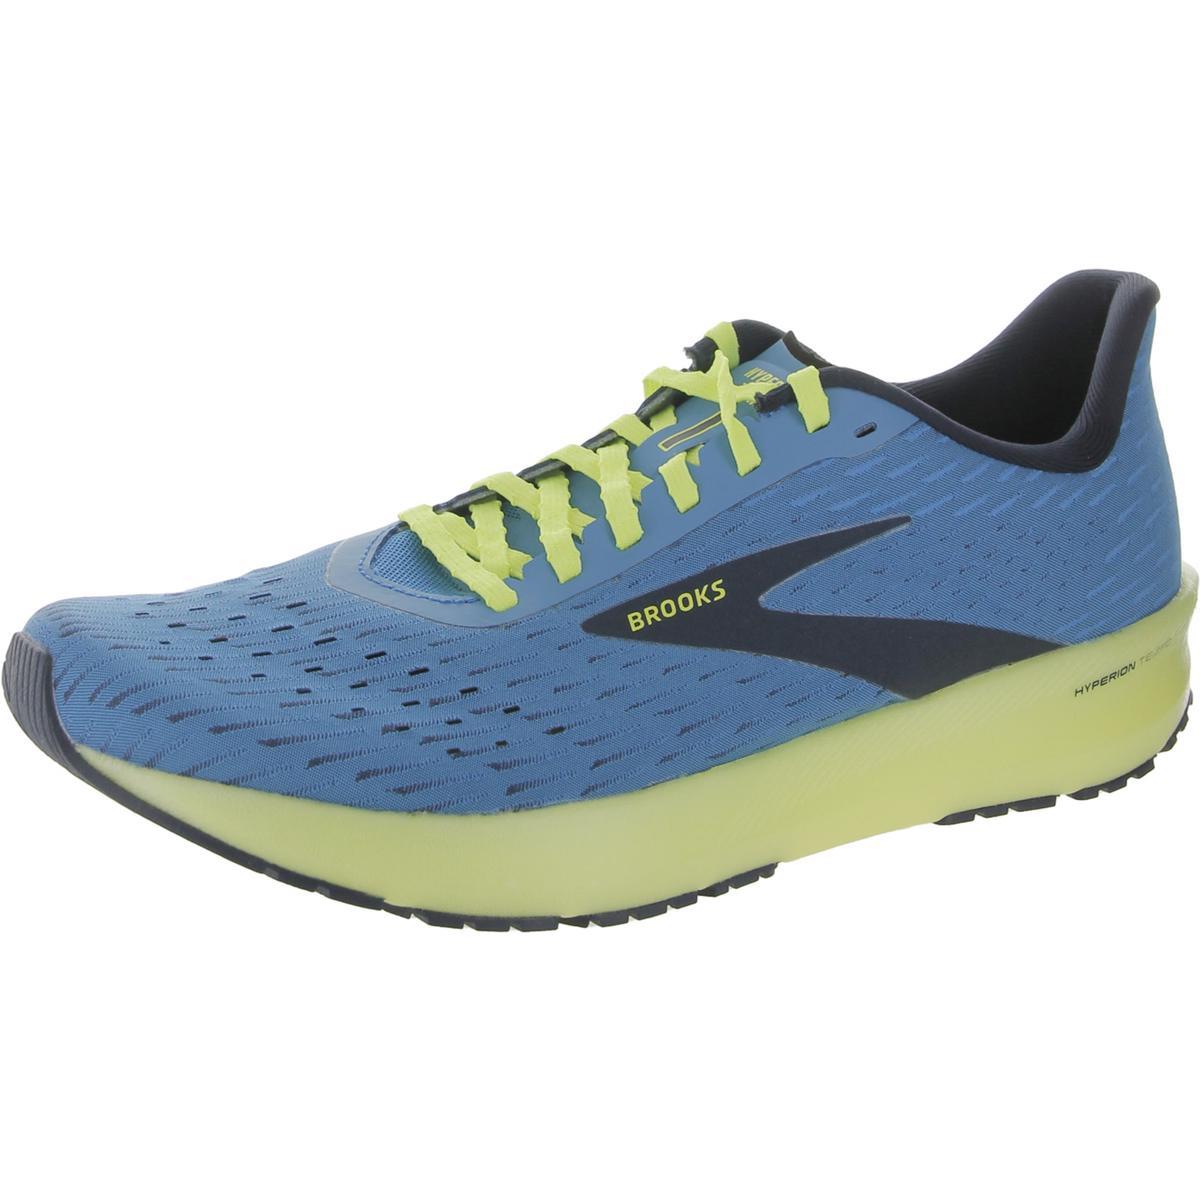 Brooks Mens Hyperion Tempo Fitness Workout Running Shoes Sneakers Bhfo 8544 Blue